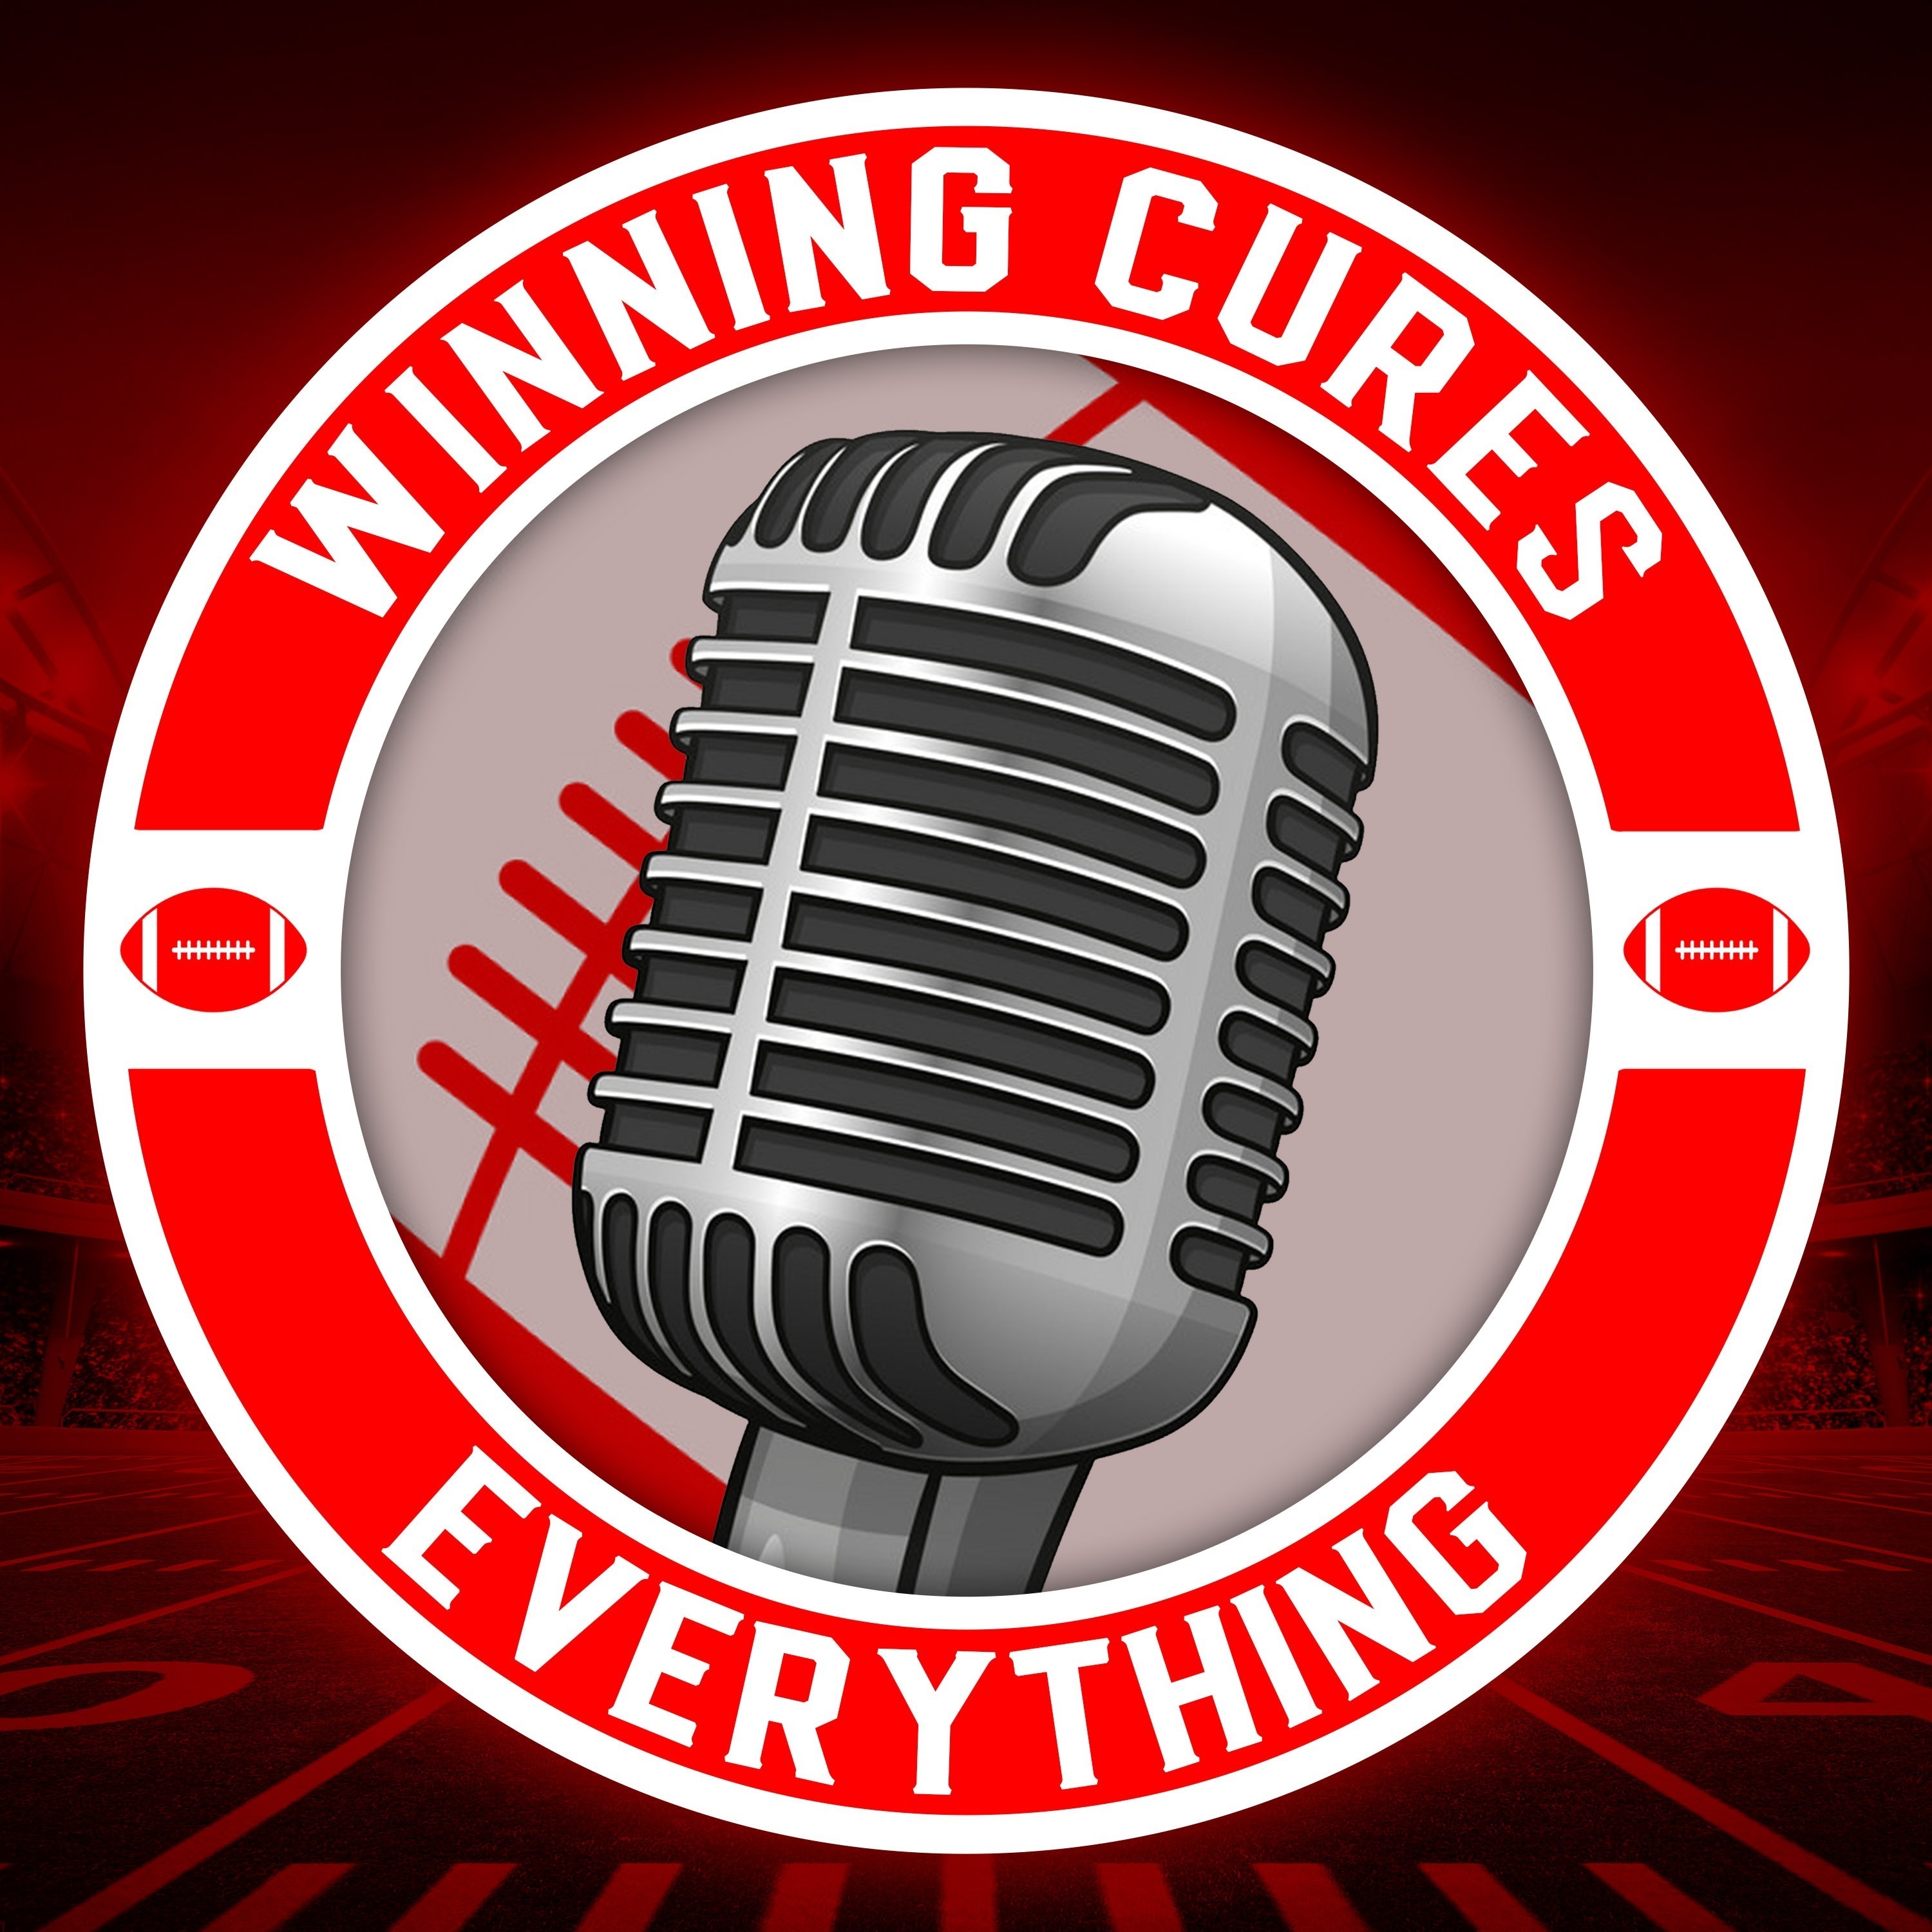 Winning Cures Everything podcast show image